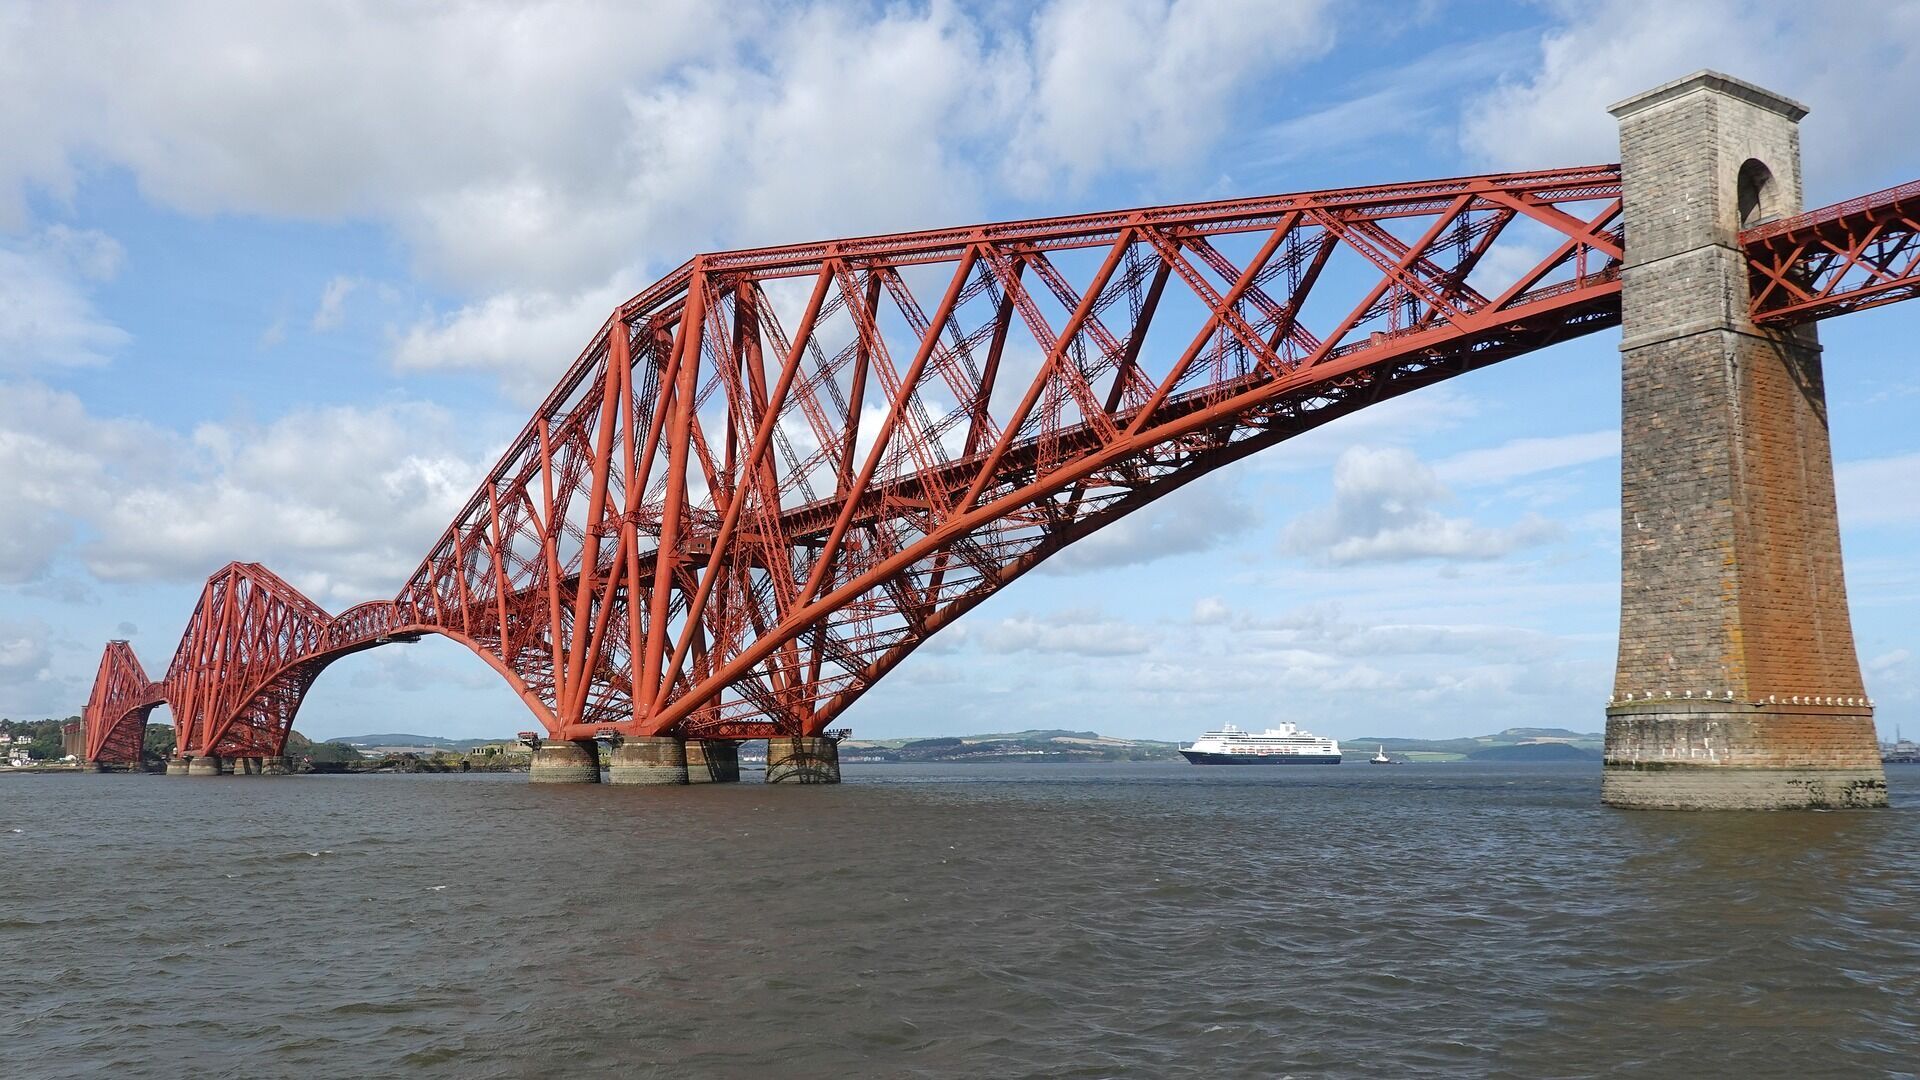 The dark side of Forth Bridge: the mystery of one of the most famous bridges in Great Britain